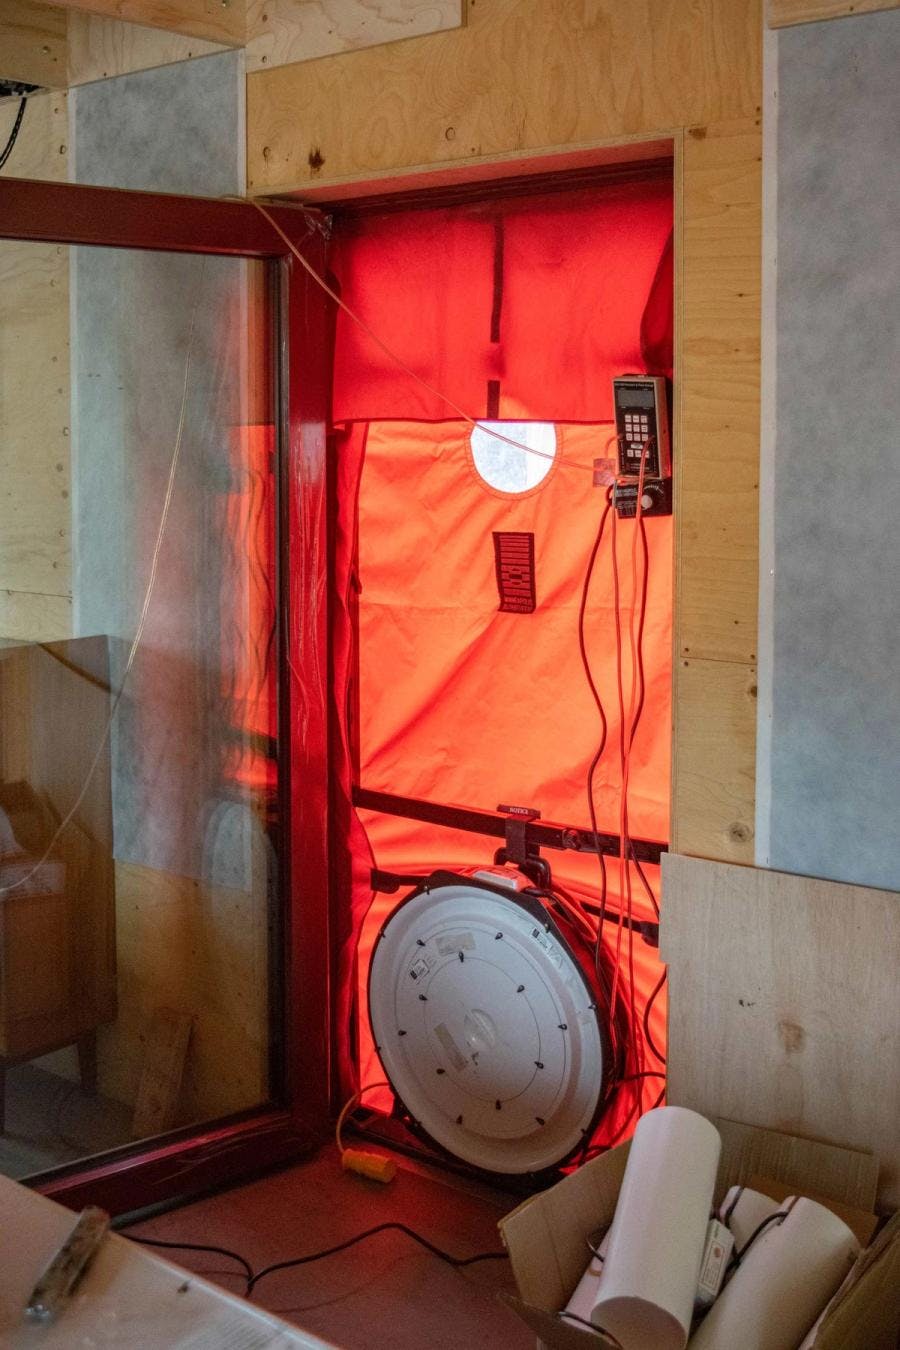 View of air tightness equipment at Nest House testing airflow rates